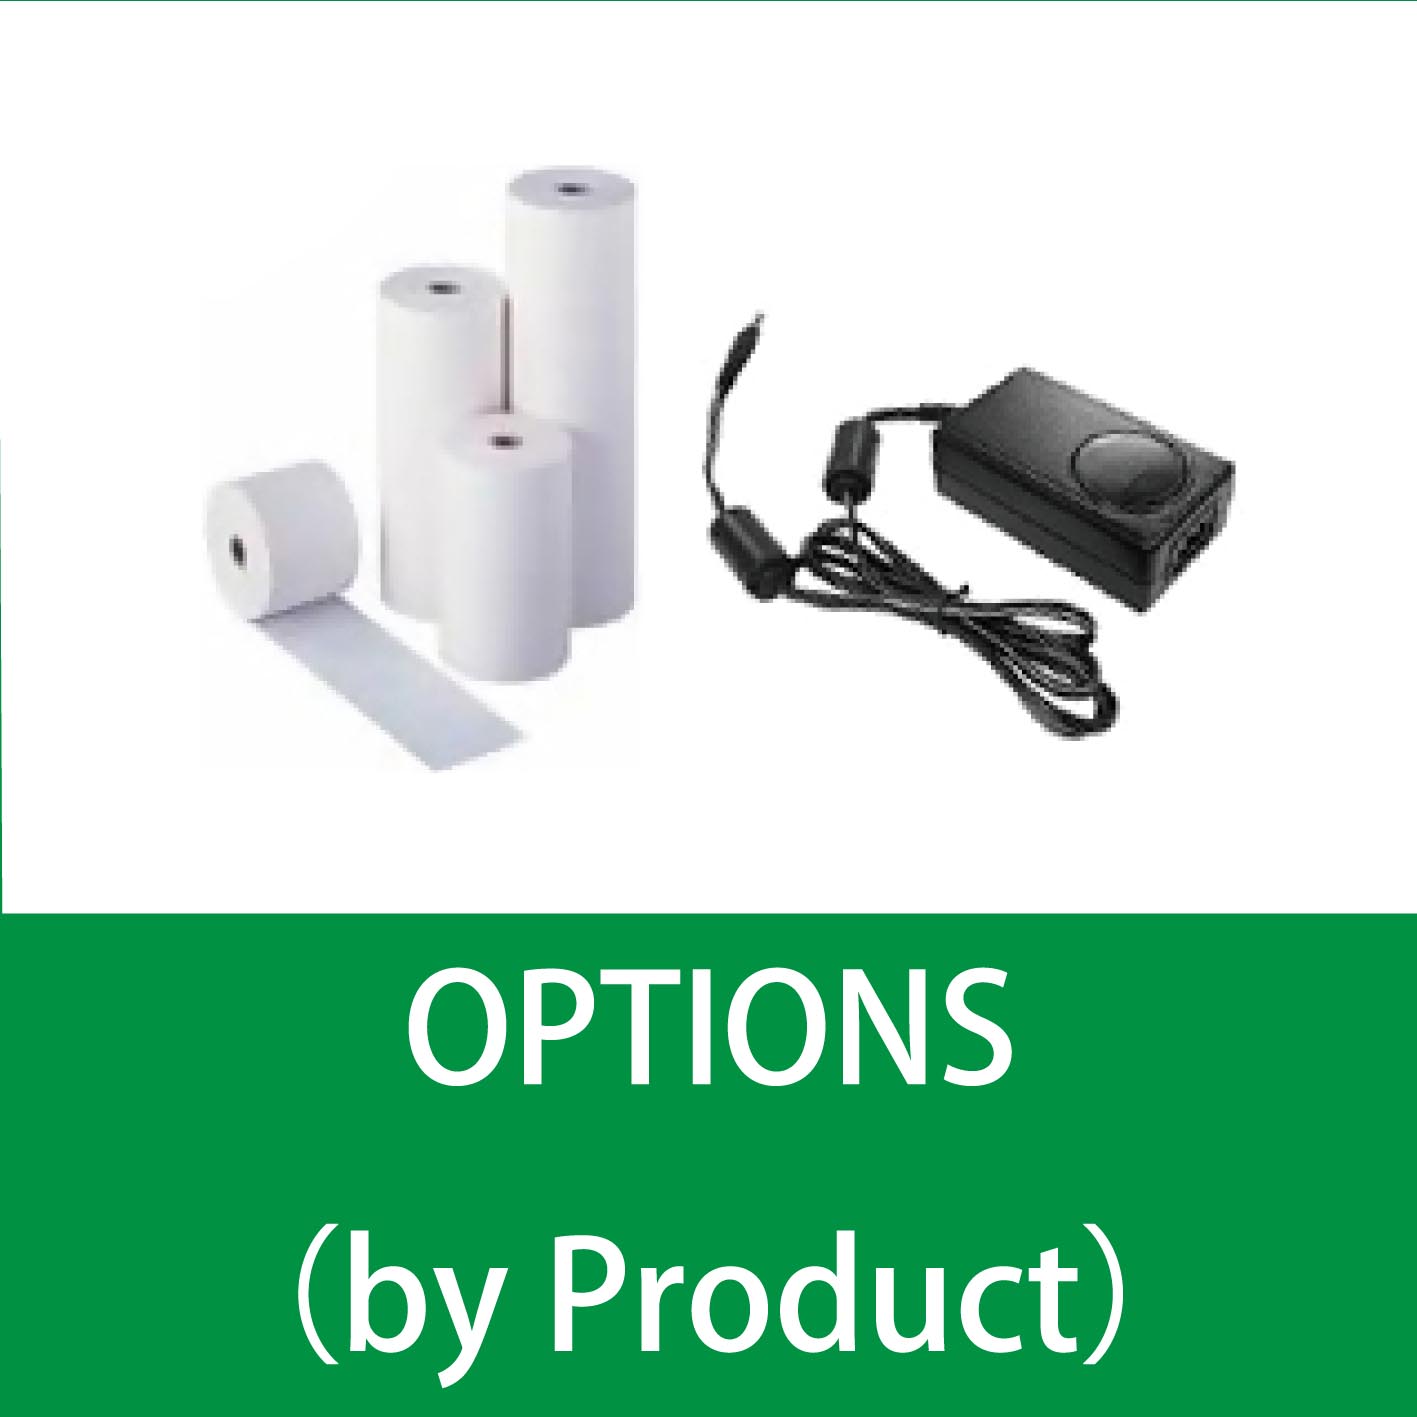 Printer Option(by products)